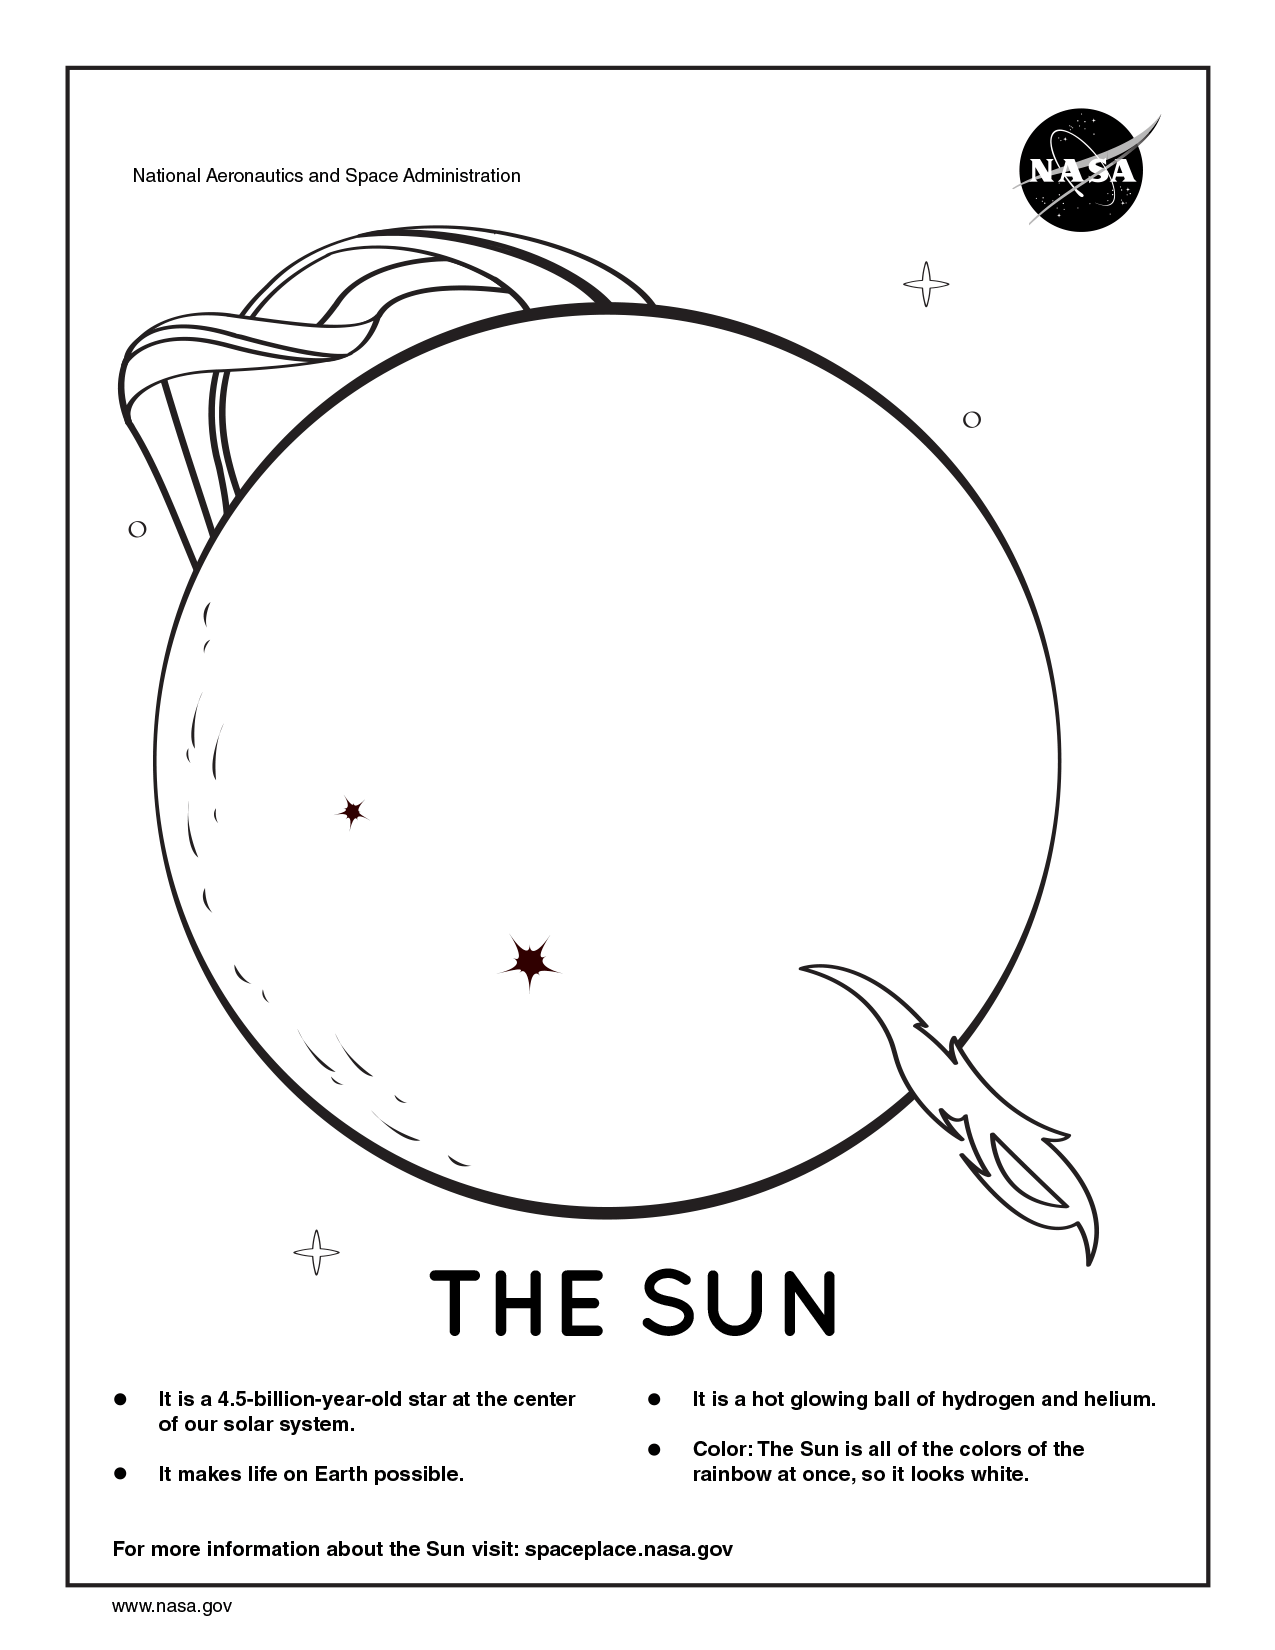 Coloring page for the Sun.